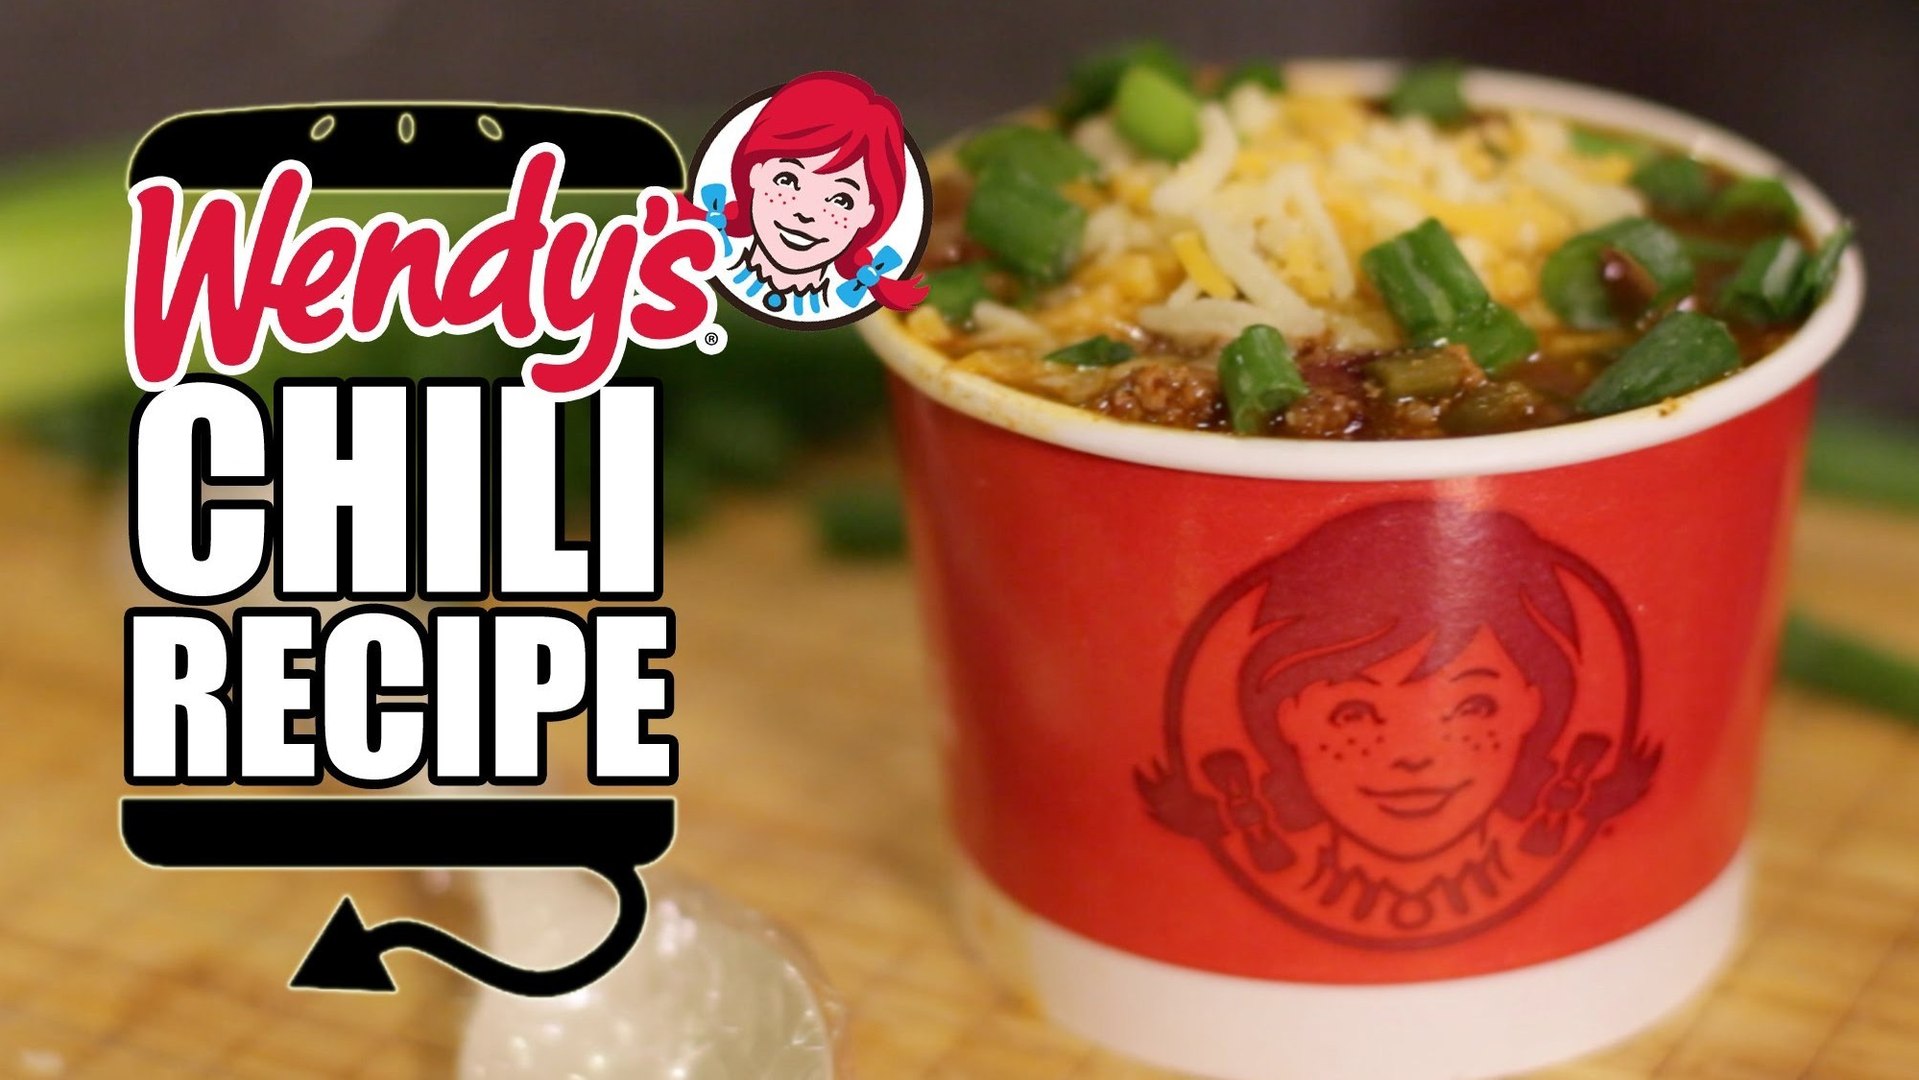 The Secret To Wendys Chili Recipe Power Pressure Cooker Xl Hellthyjunkfood - Video Dailymotion